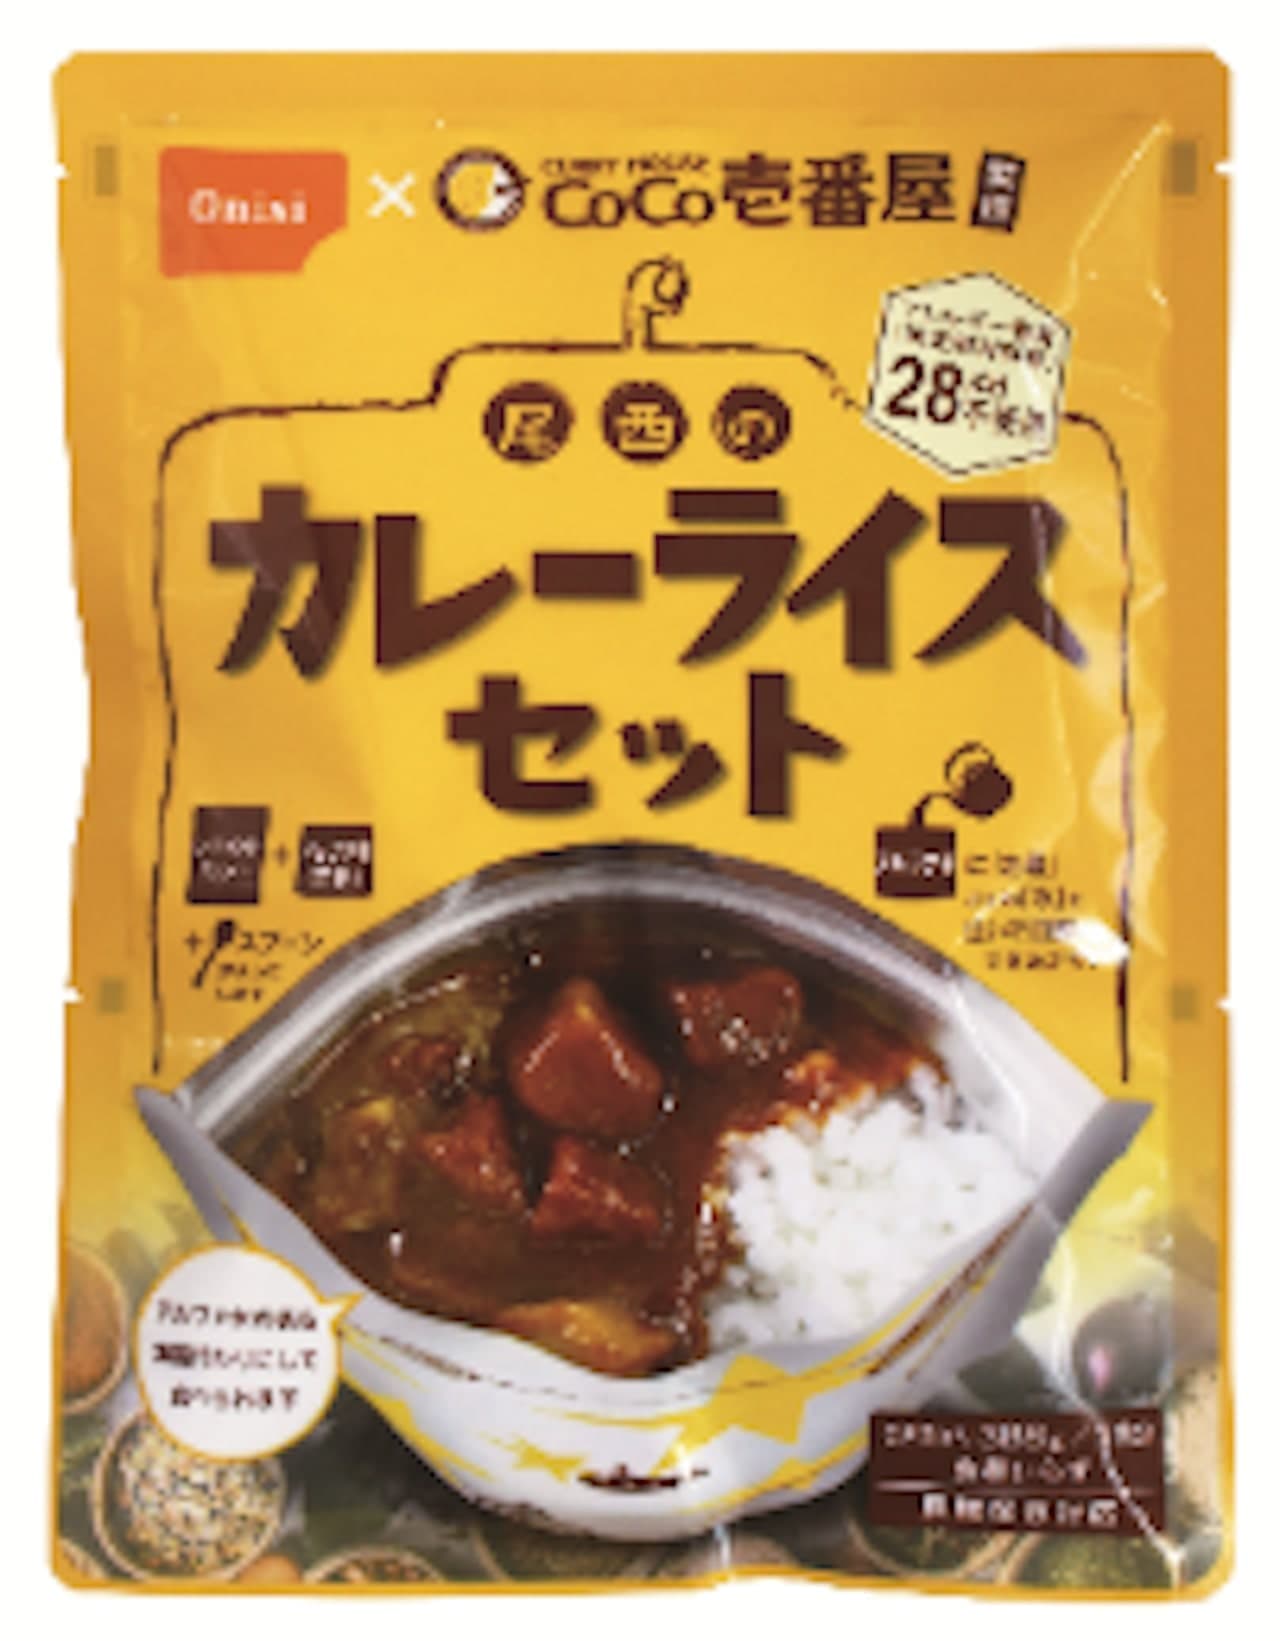 Long-term preserved food "CoCo Ichibanya supervision Onishi's curry rice set"